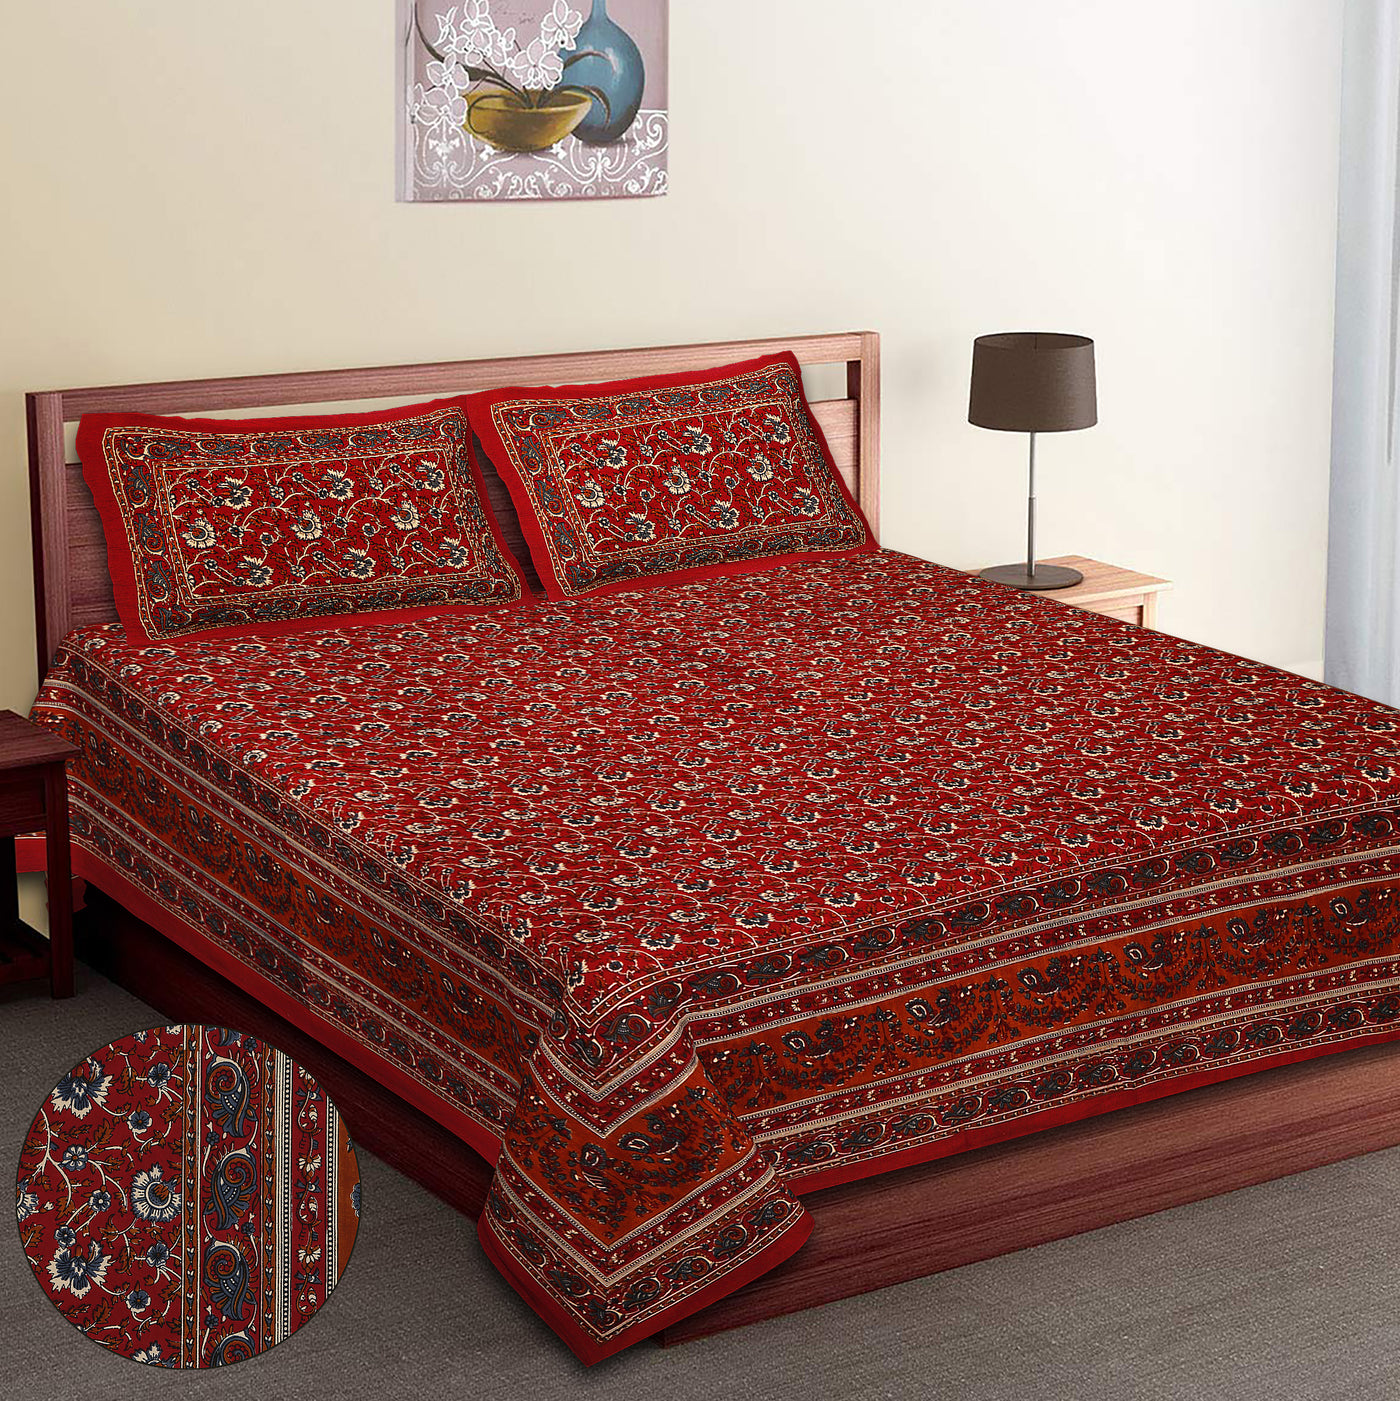 Braise Premium | King Size 100 x 108 in | 100% Pure Cotton | Double Bedsheet with 2 Pillow Covers (BG 05)